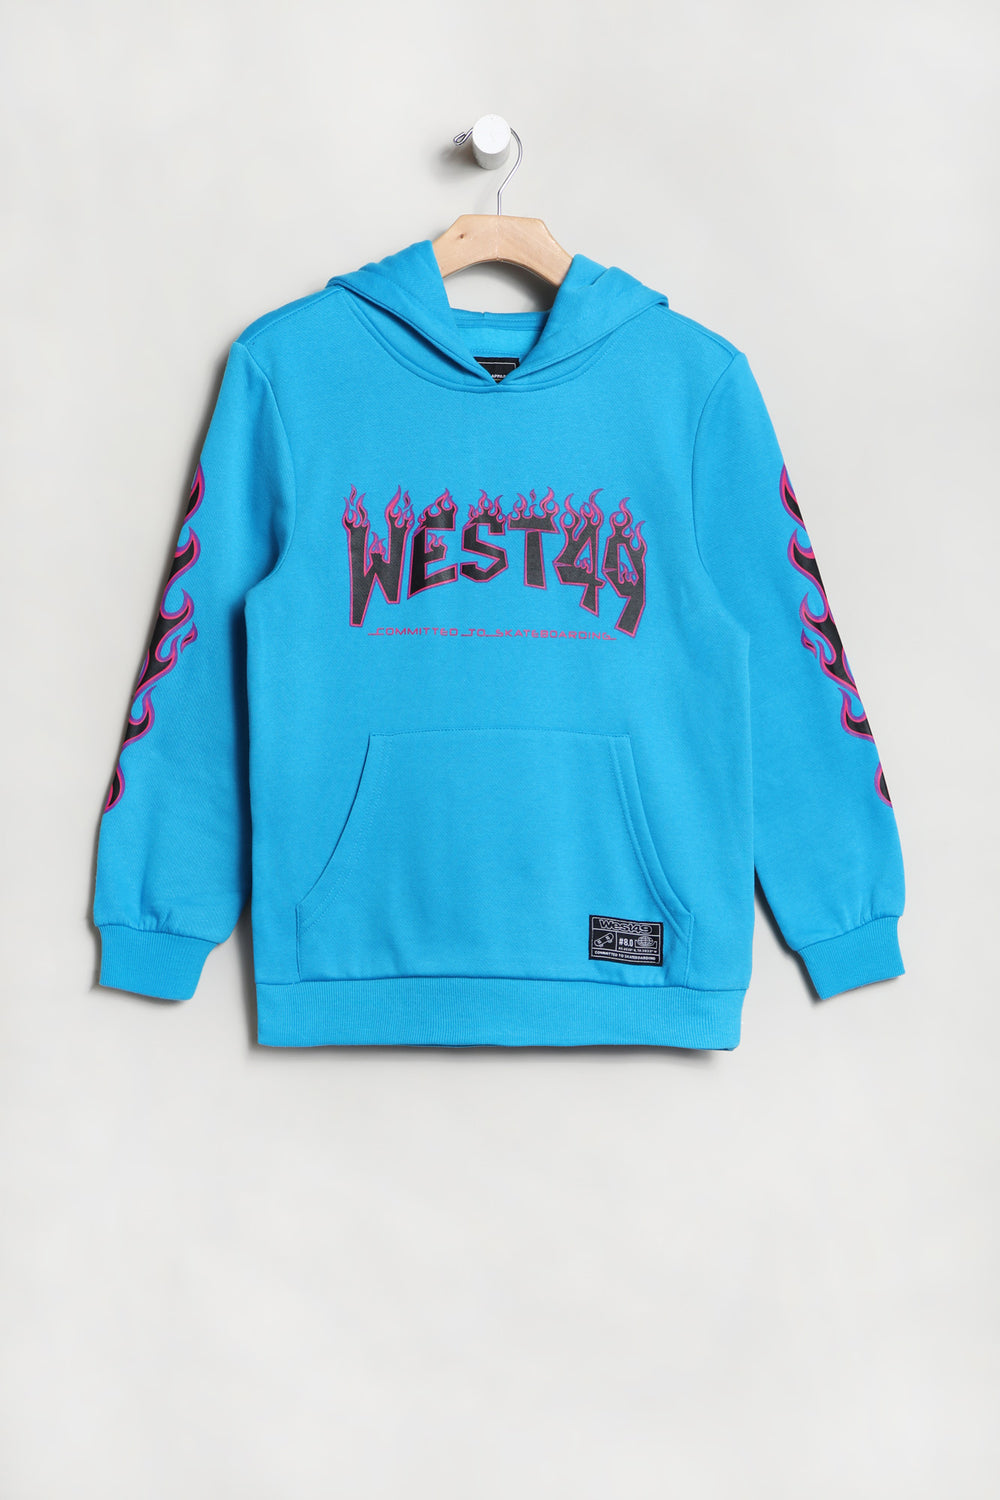 West49 Youth Flame Hoodie Blue